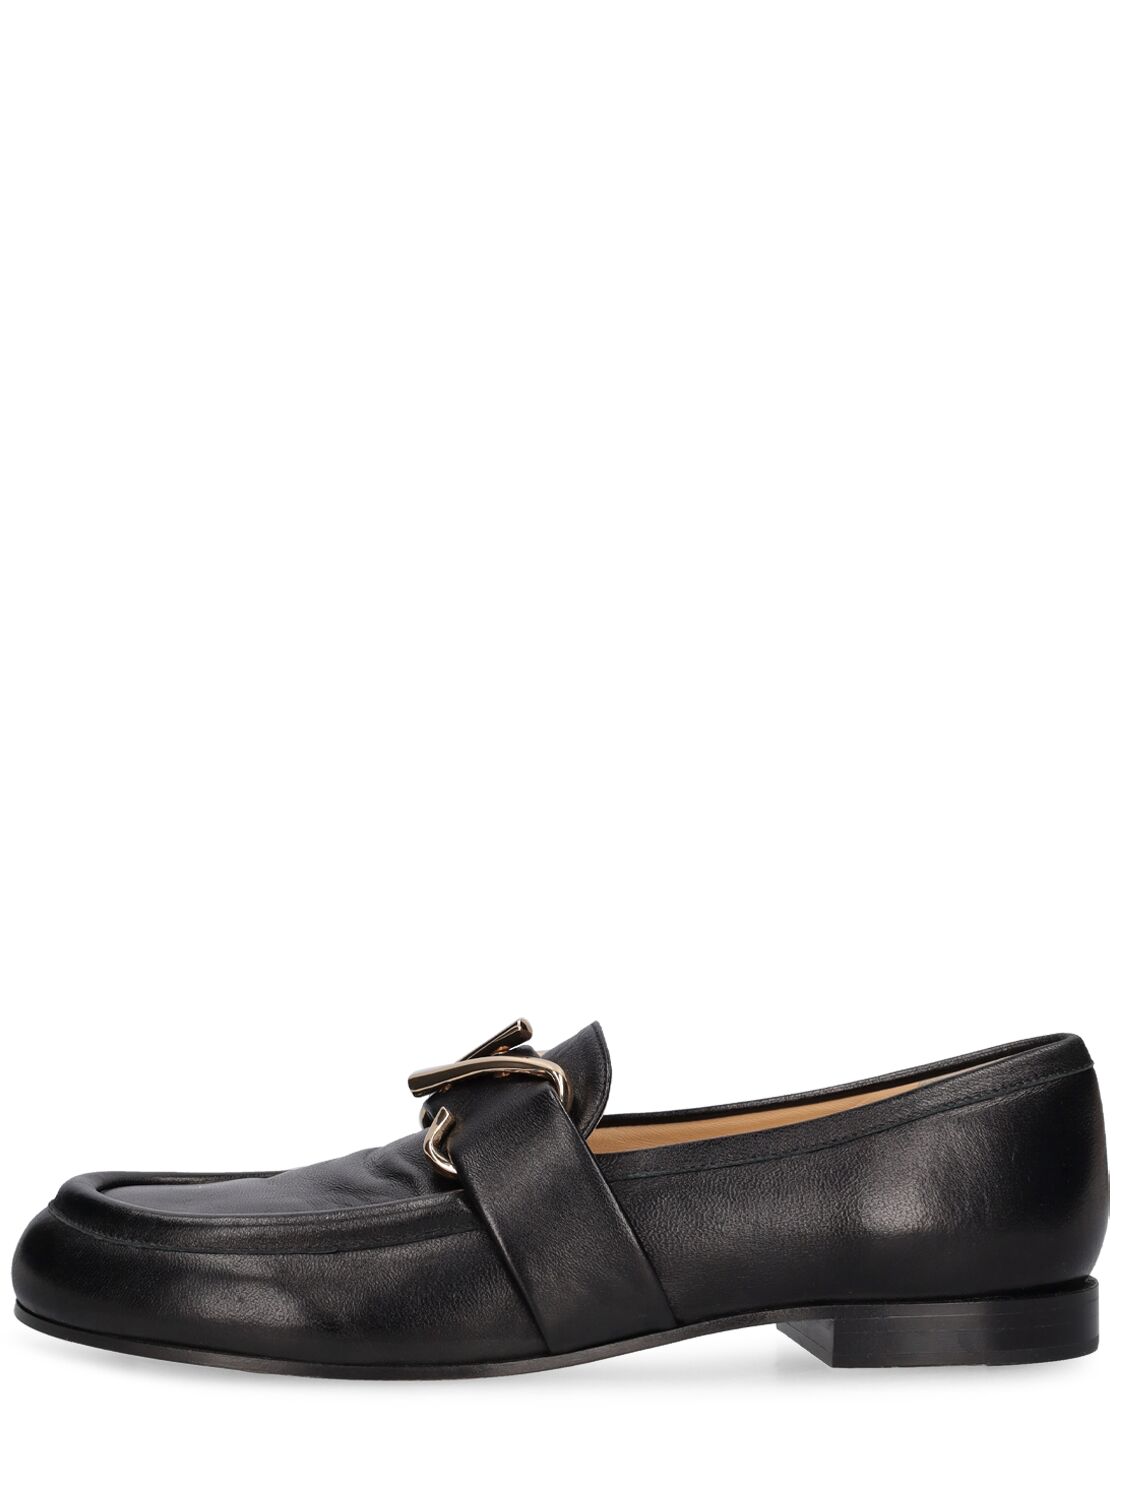 Proenza Schouler 10mm Leather Loafers In Black